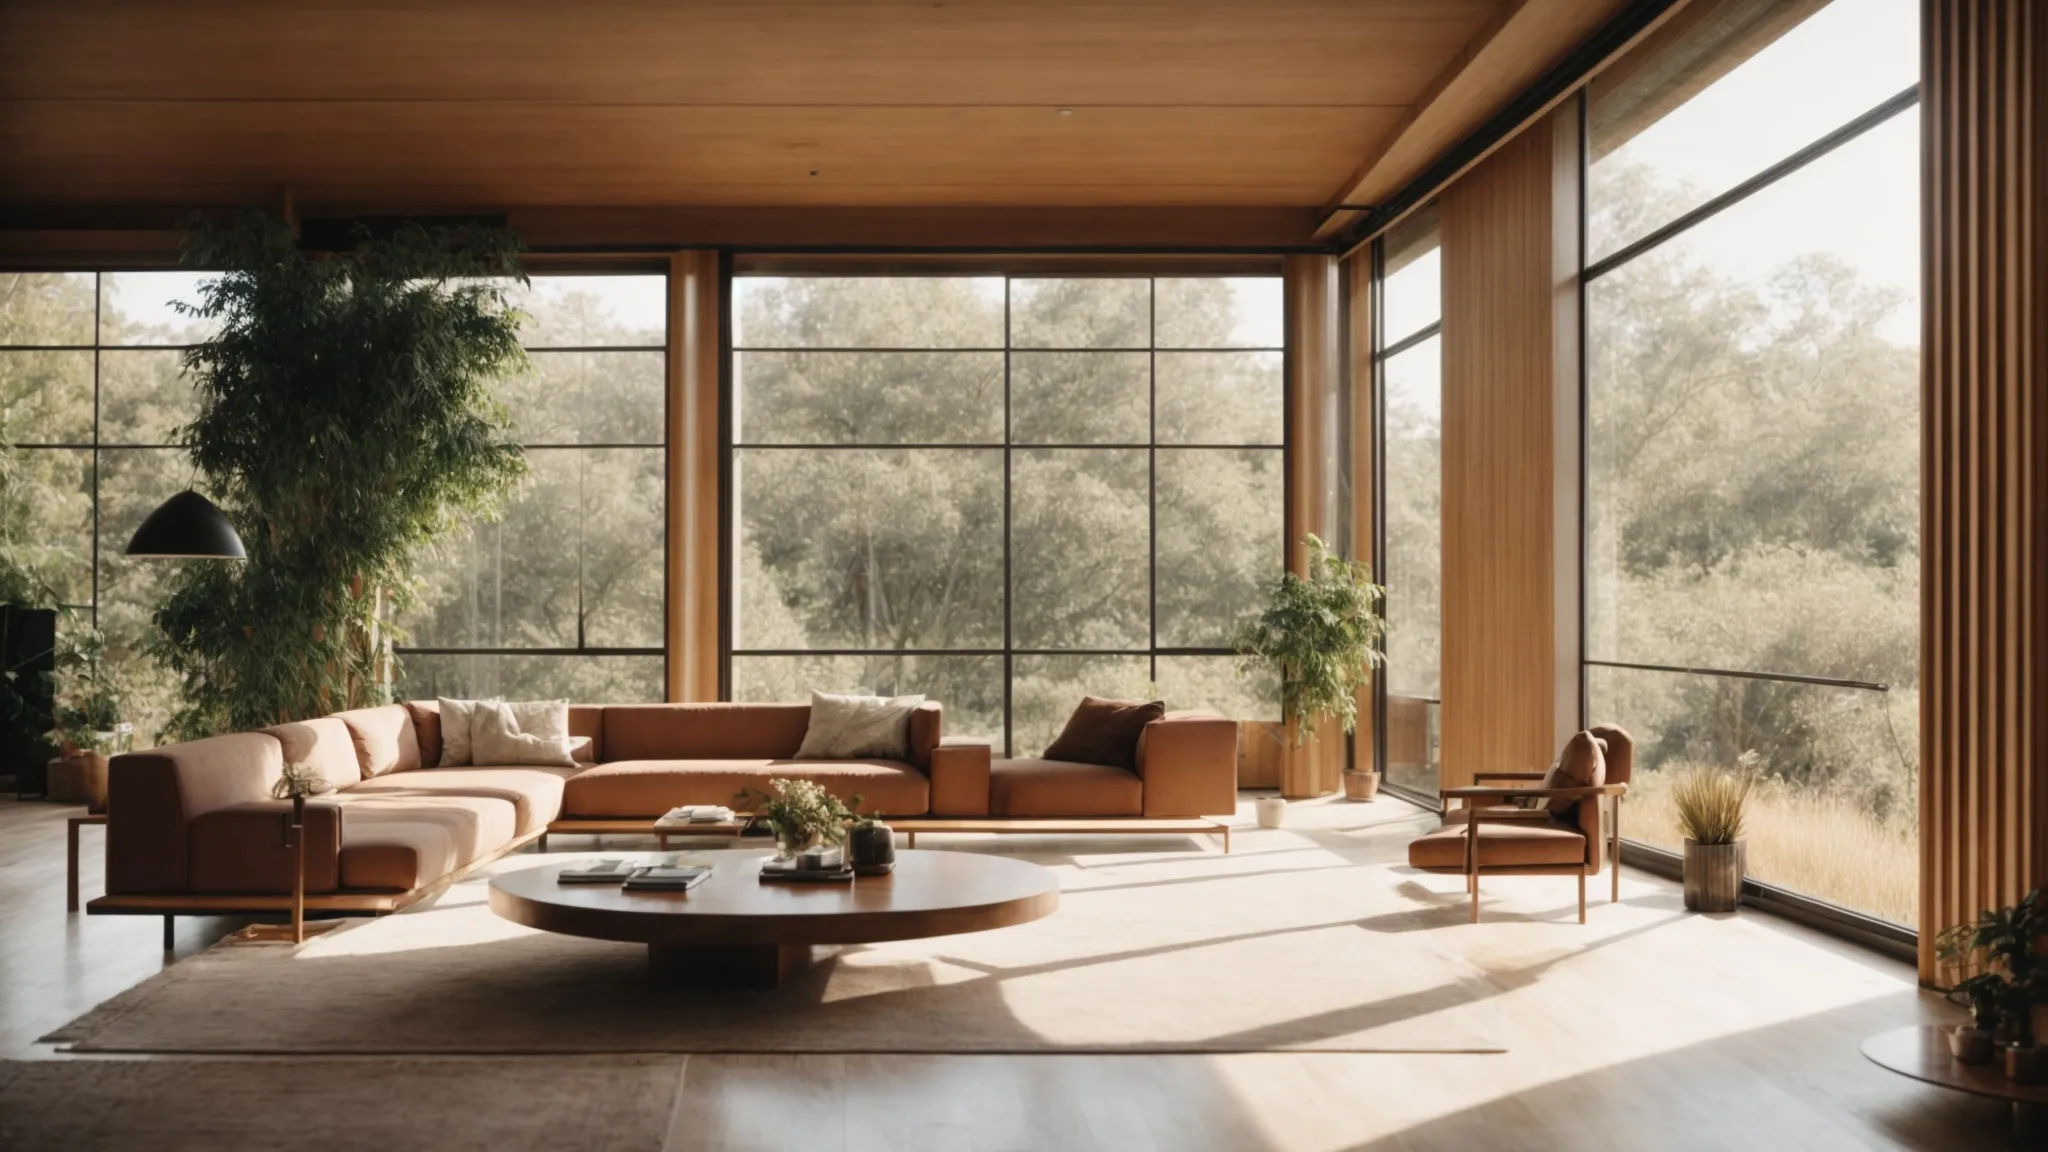 a spacious, sunlit room featuring large windows that maximize natural light, with a focus on minimalist design and natural materials.